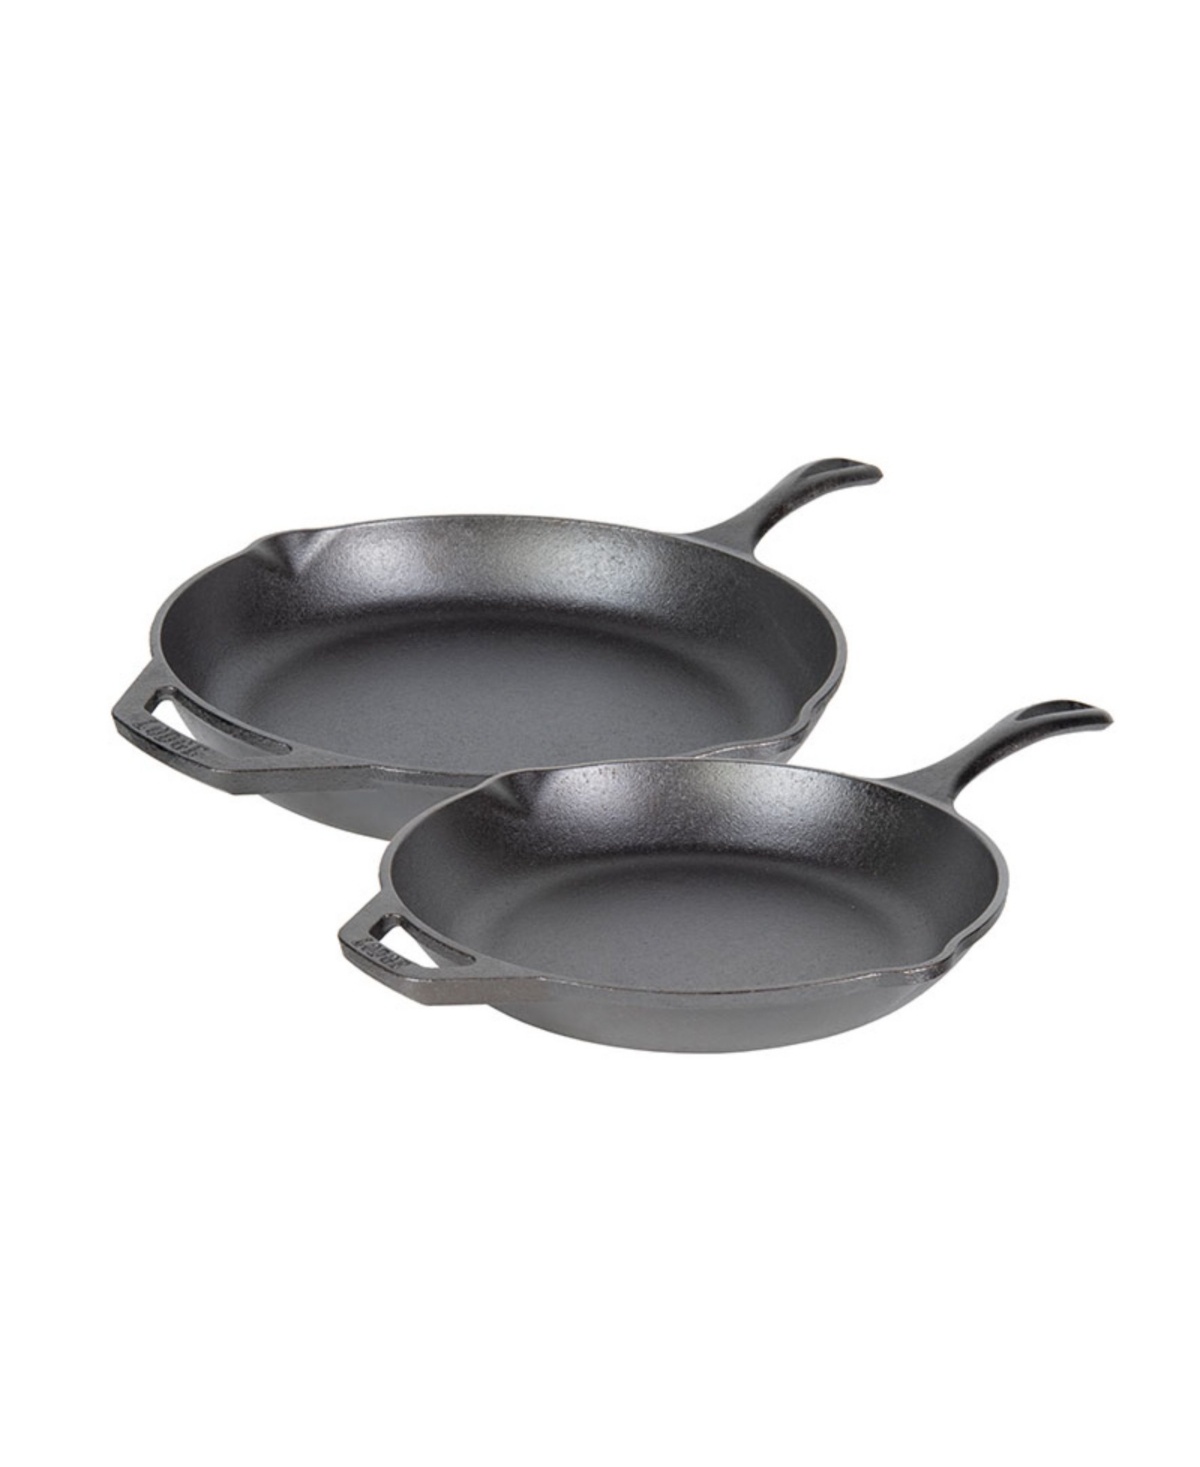 Lodge Cast Iron Chef Collection 2 Piece Skillet Cookware Set In Black